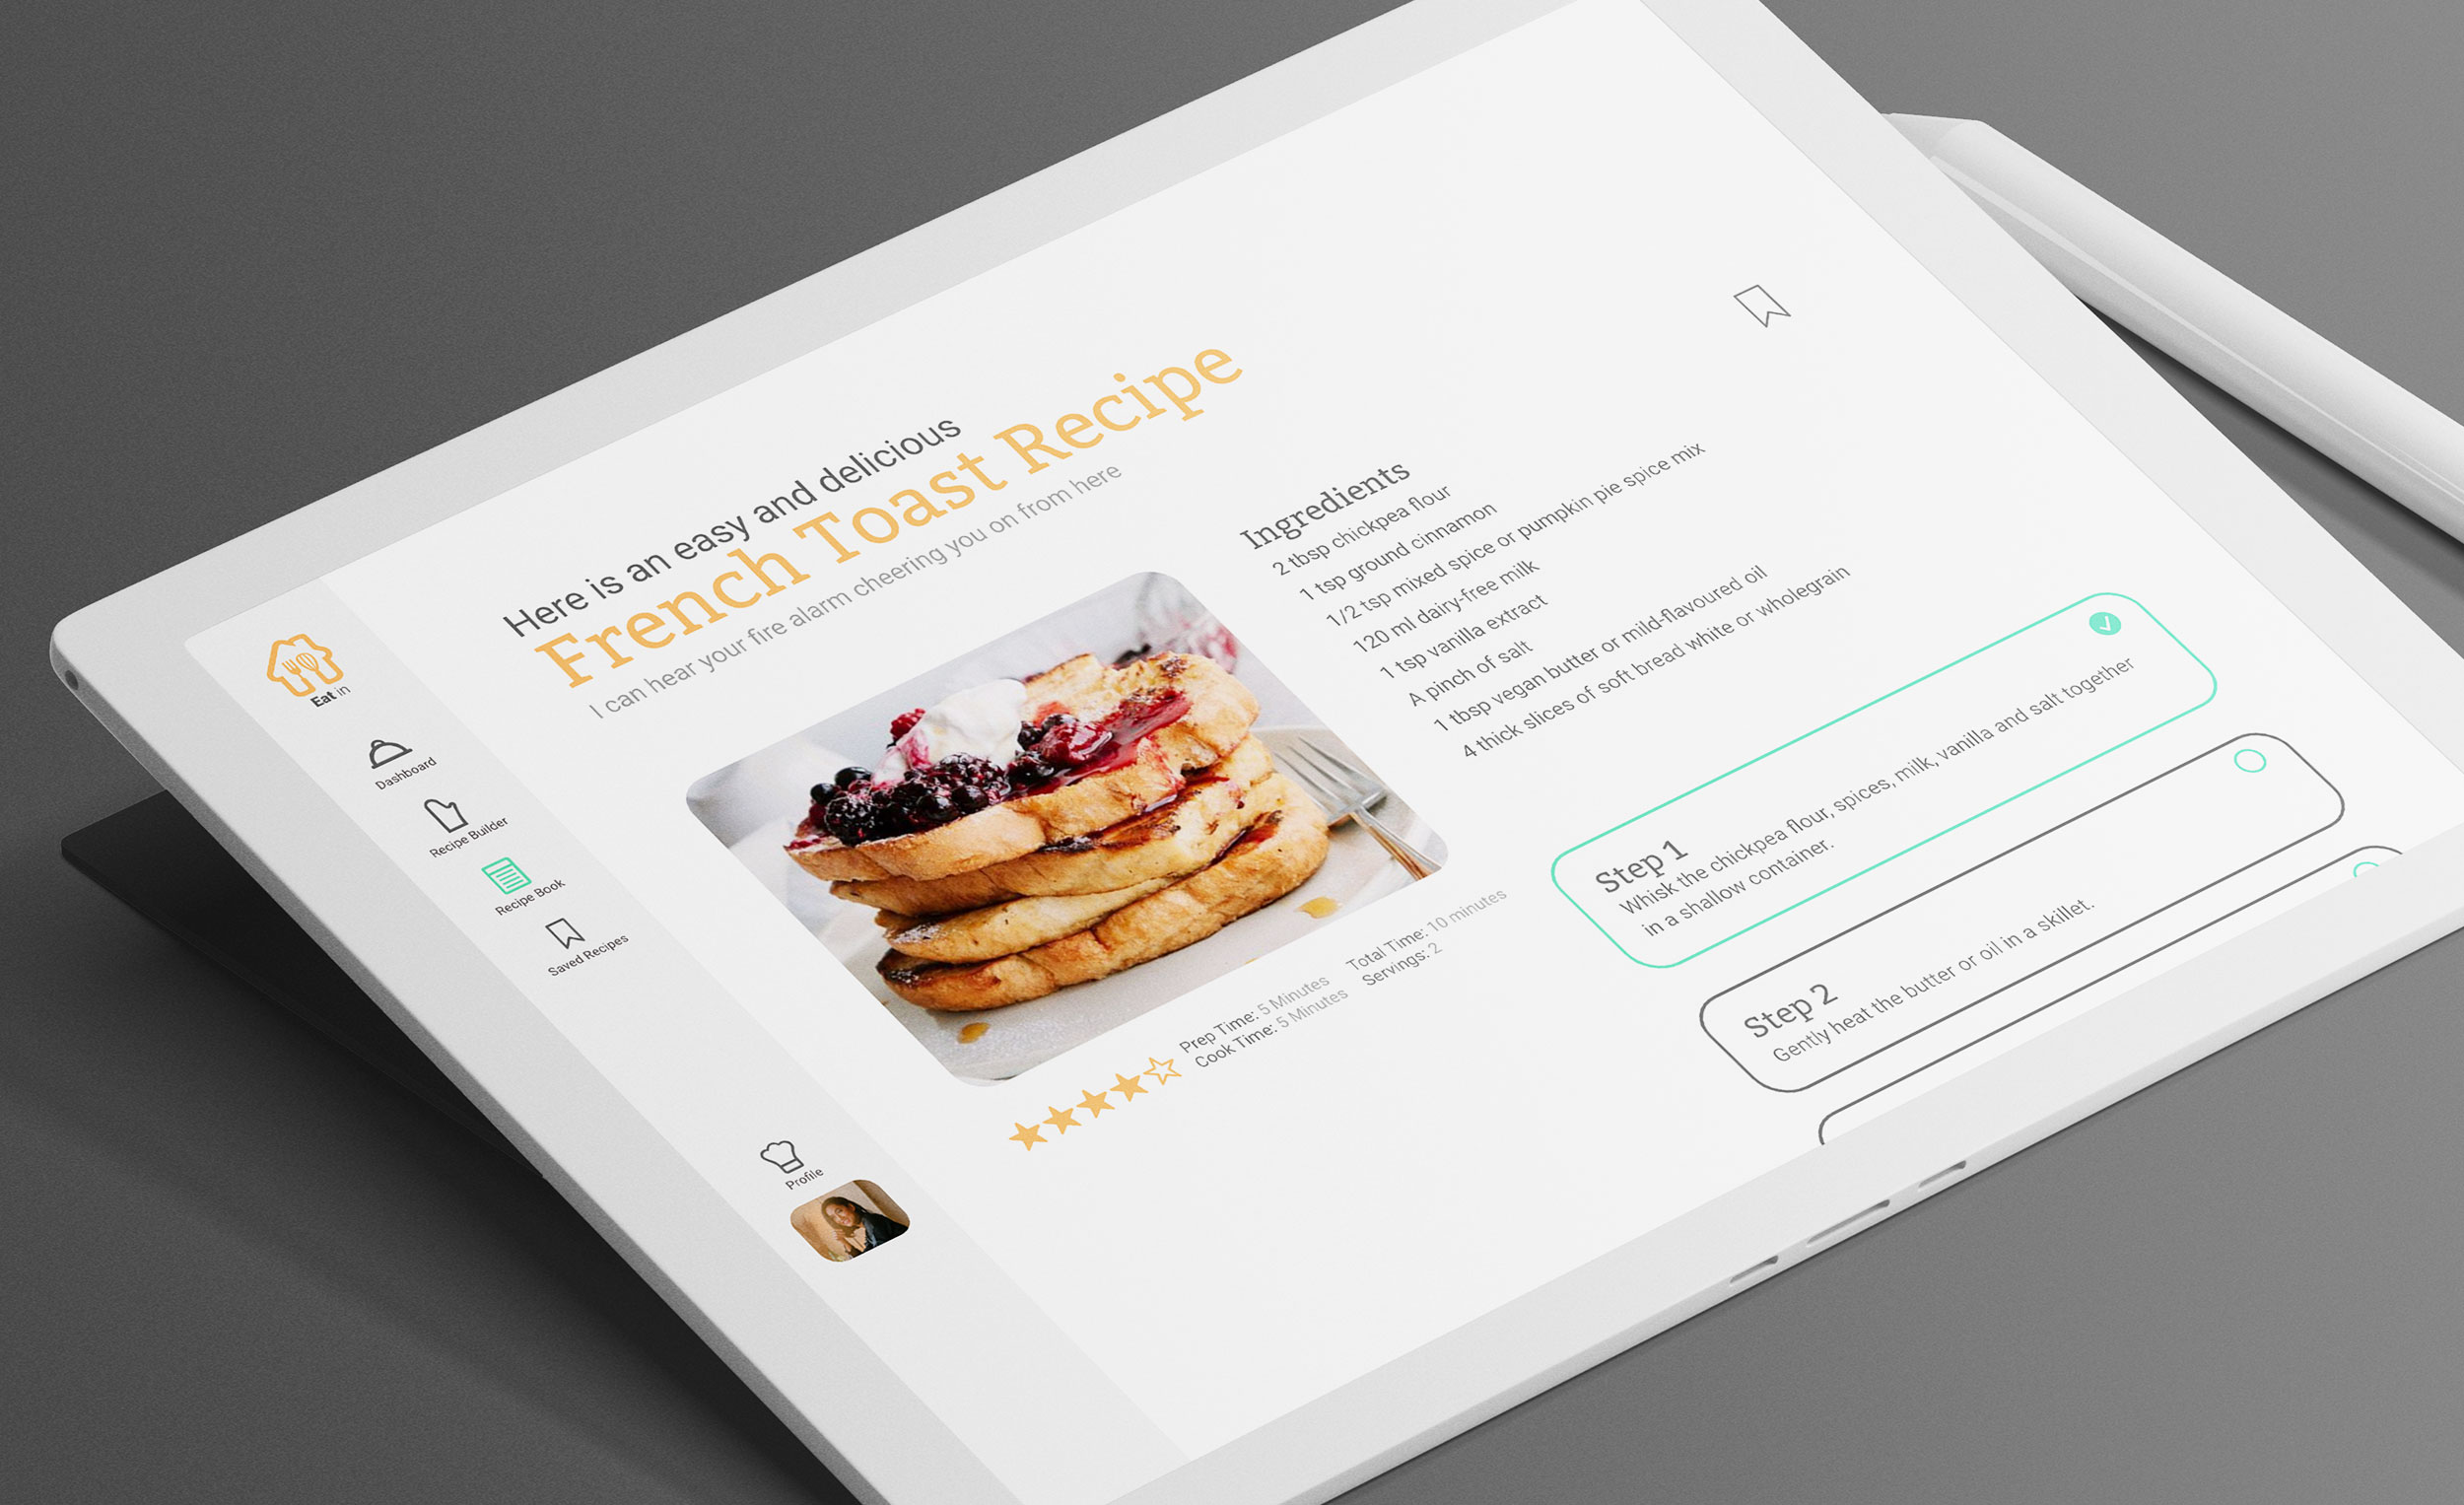 Tablet mockup showing what the french toast recipe would look like when clicked on